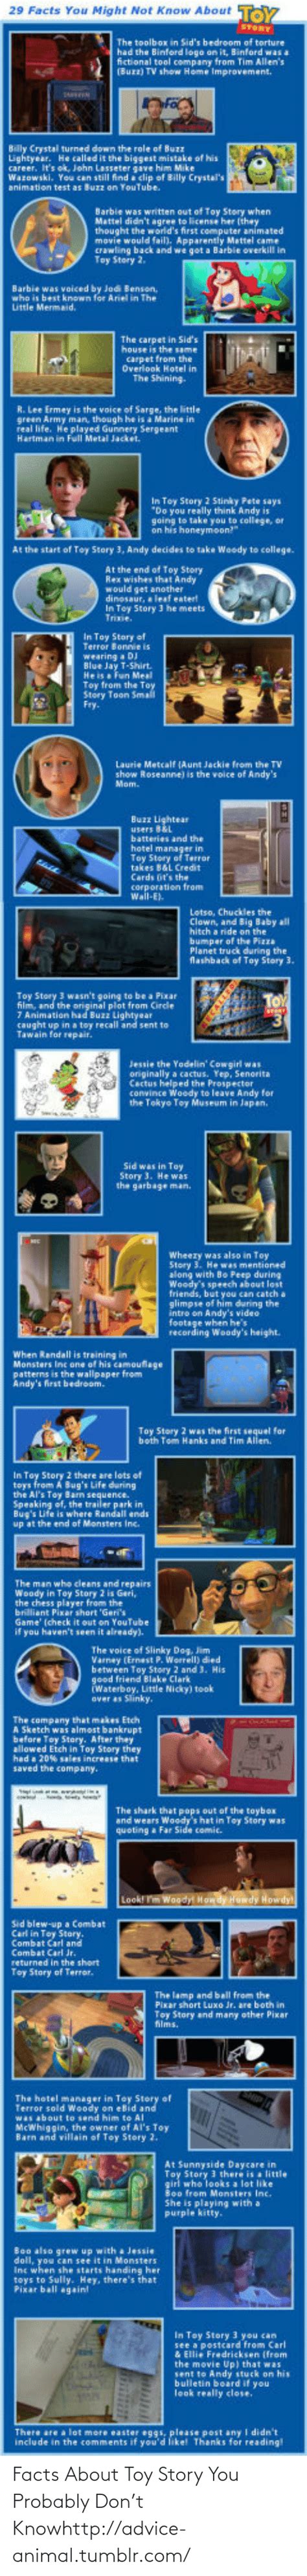 29 Facts You Might Not Know About Toy Story The Toolbox In